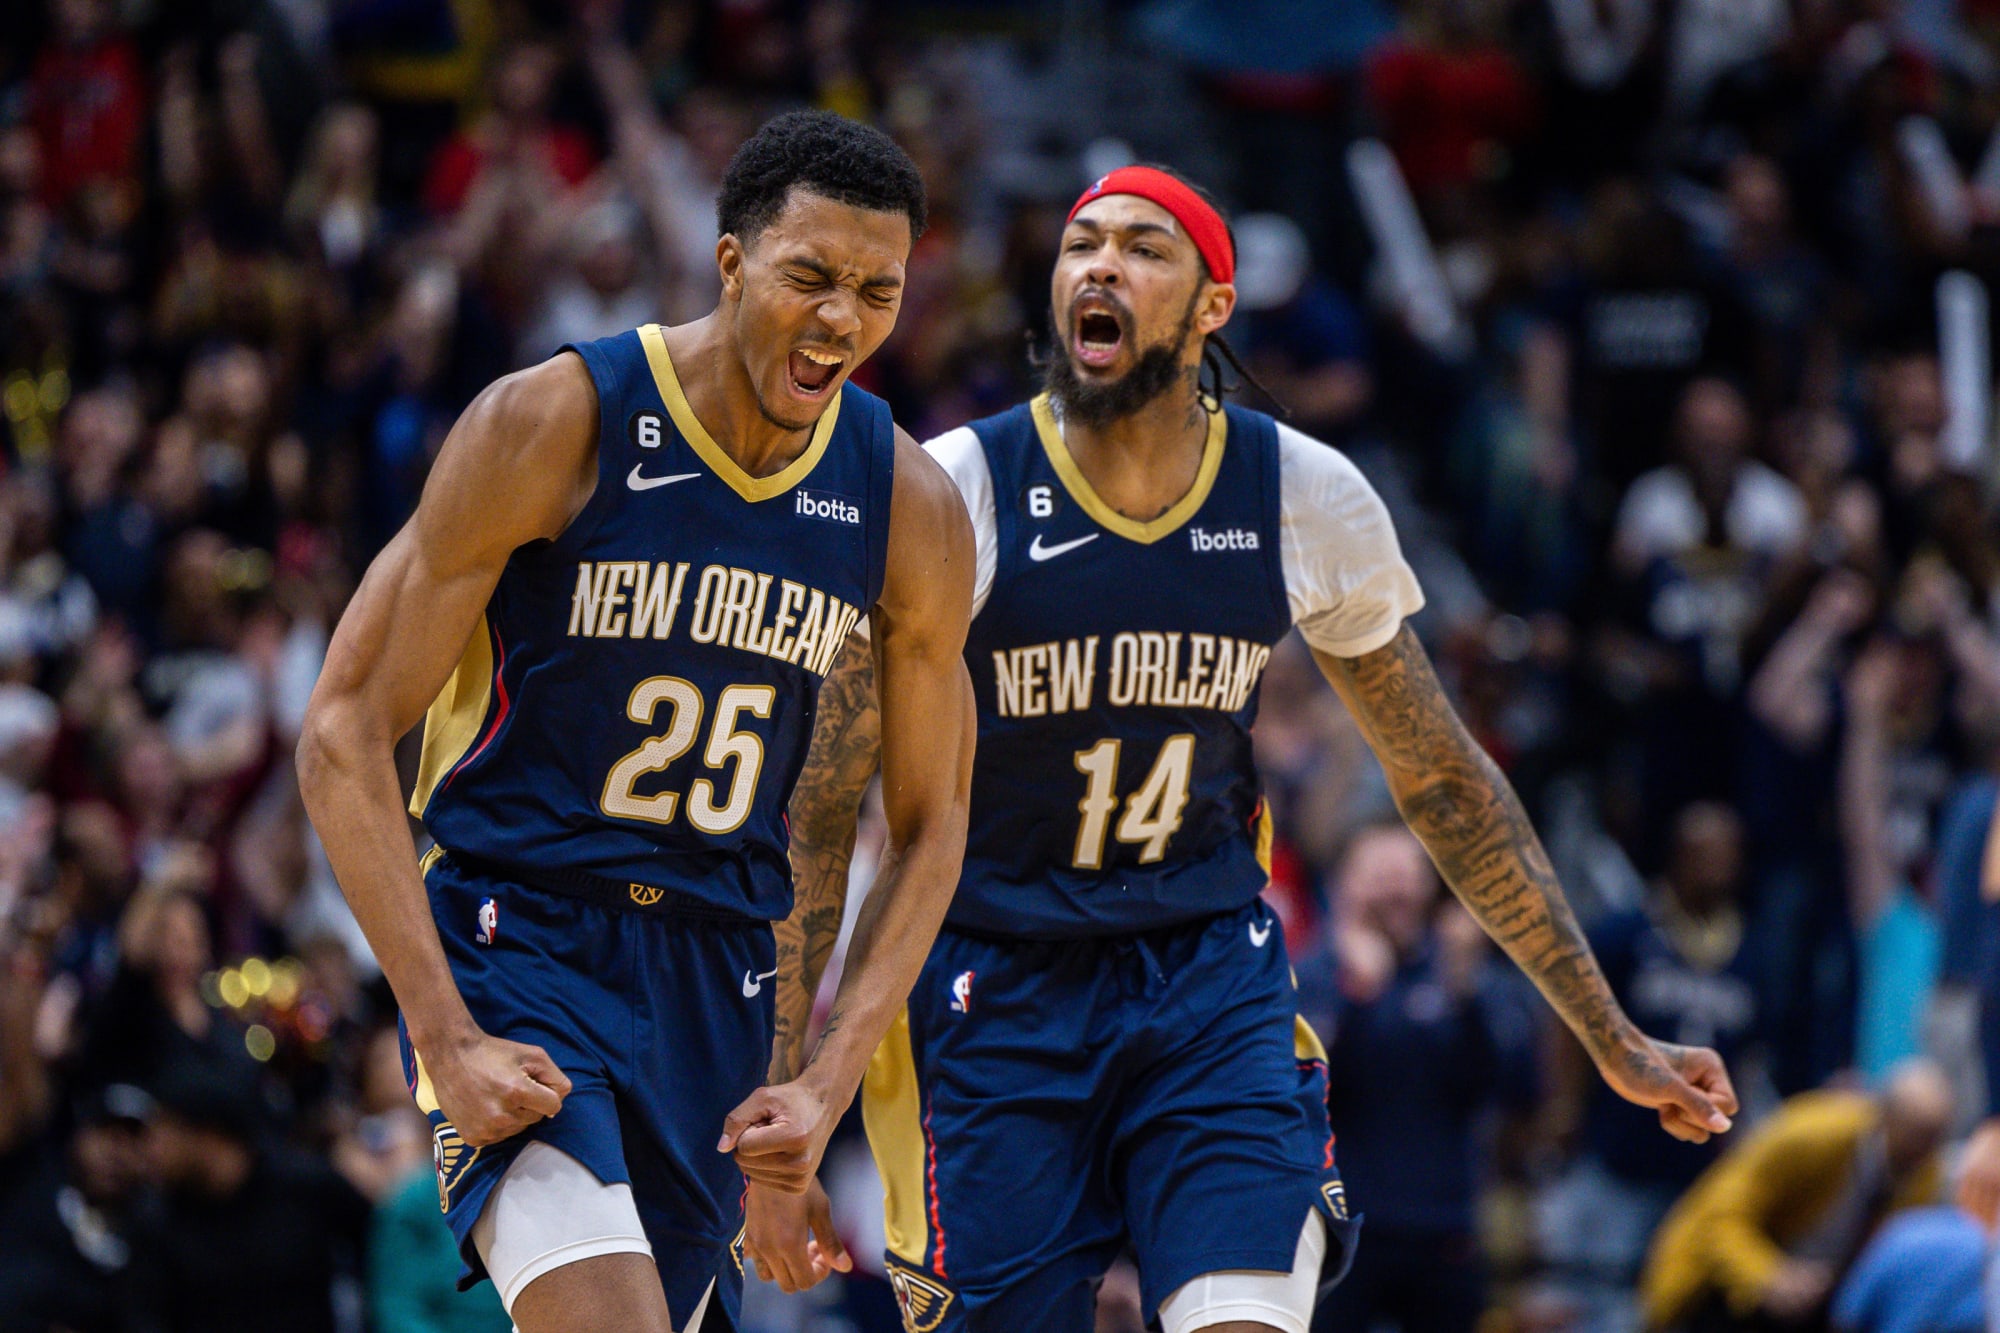 Ranking the New Orleans Pelicans top 6 trade assets